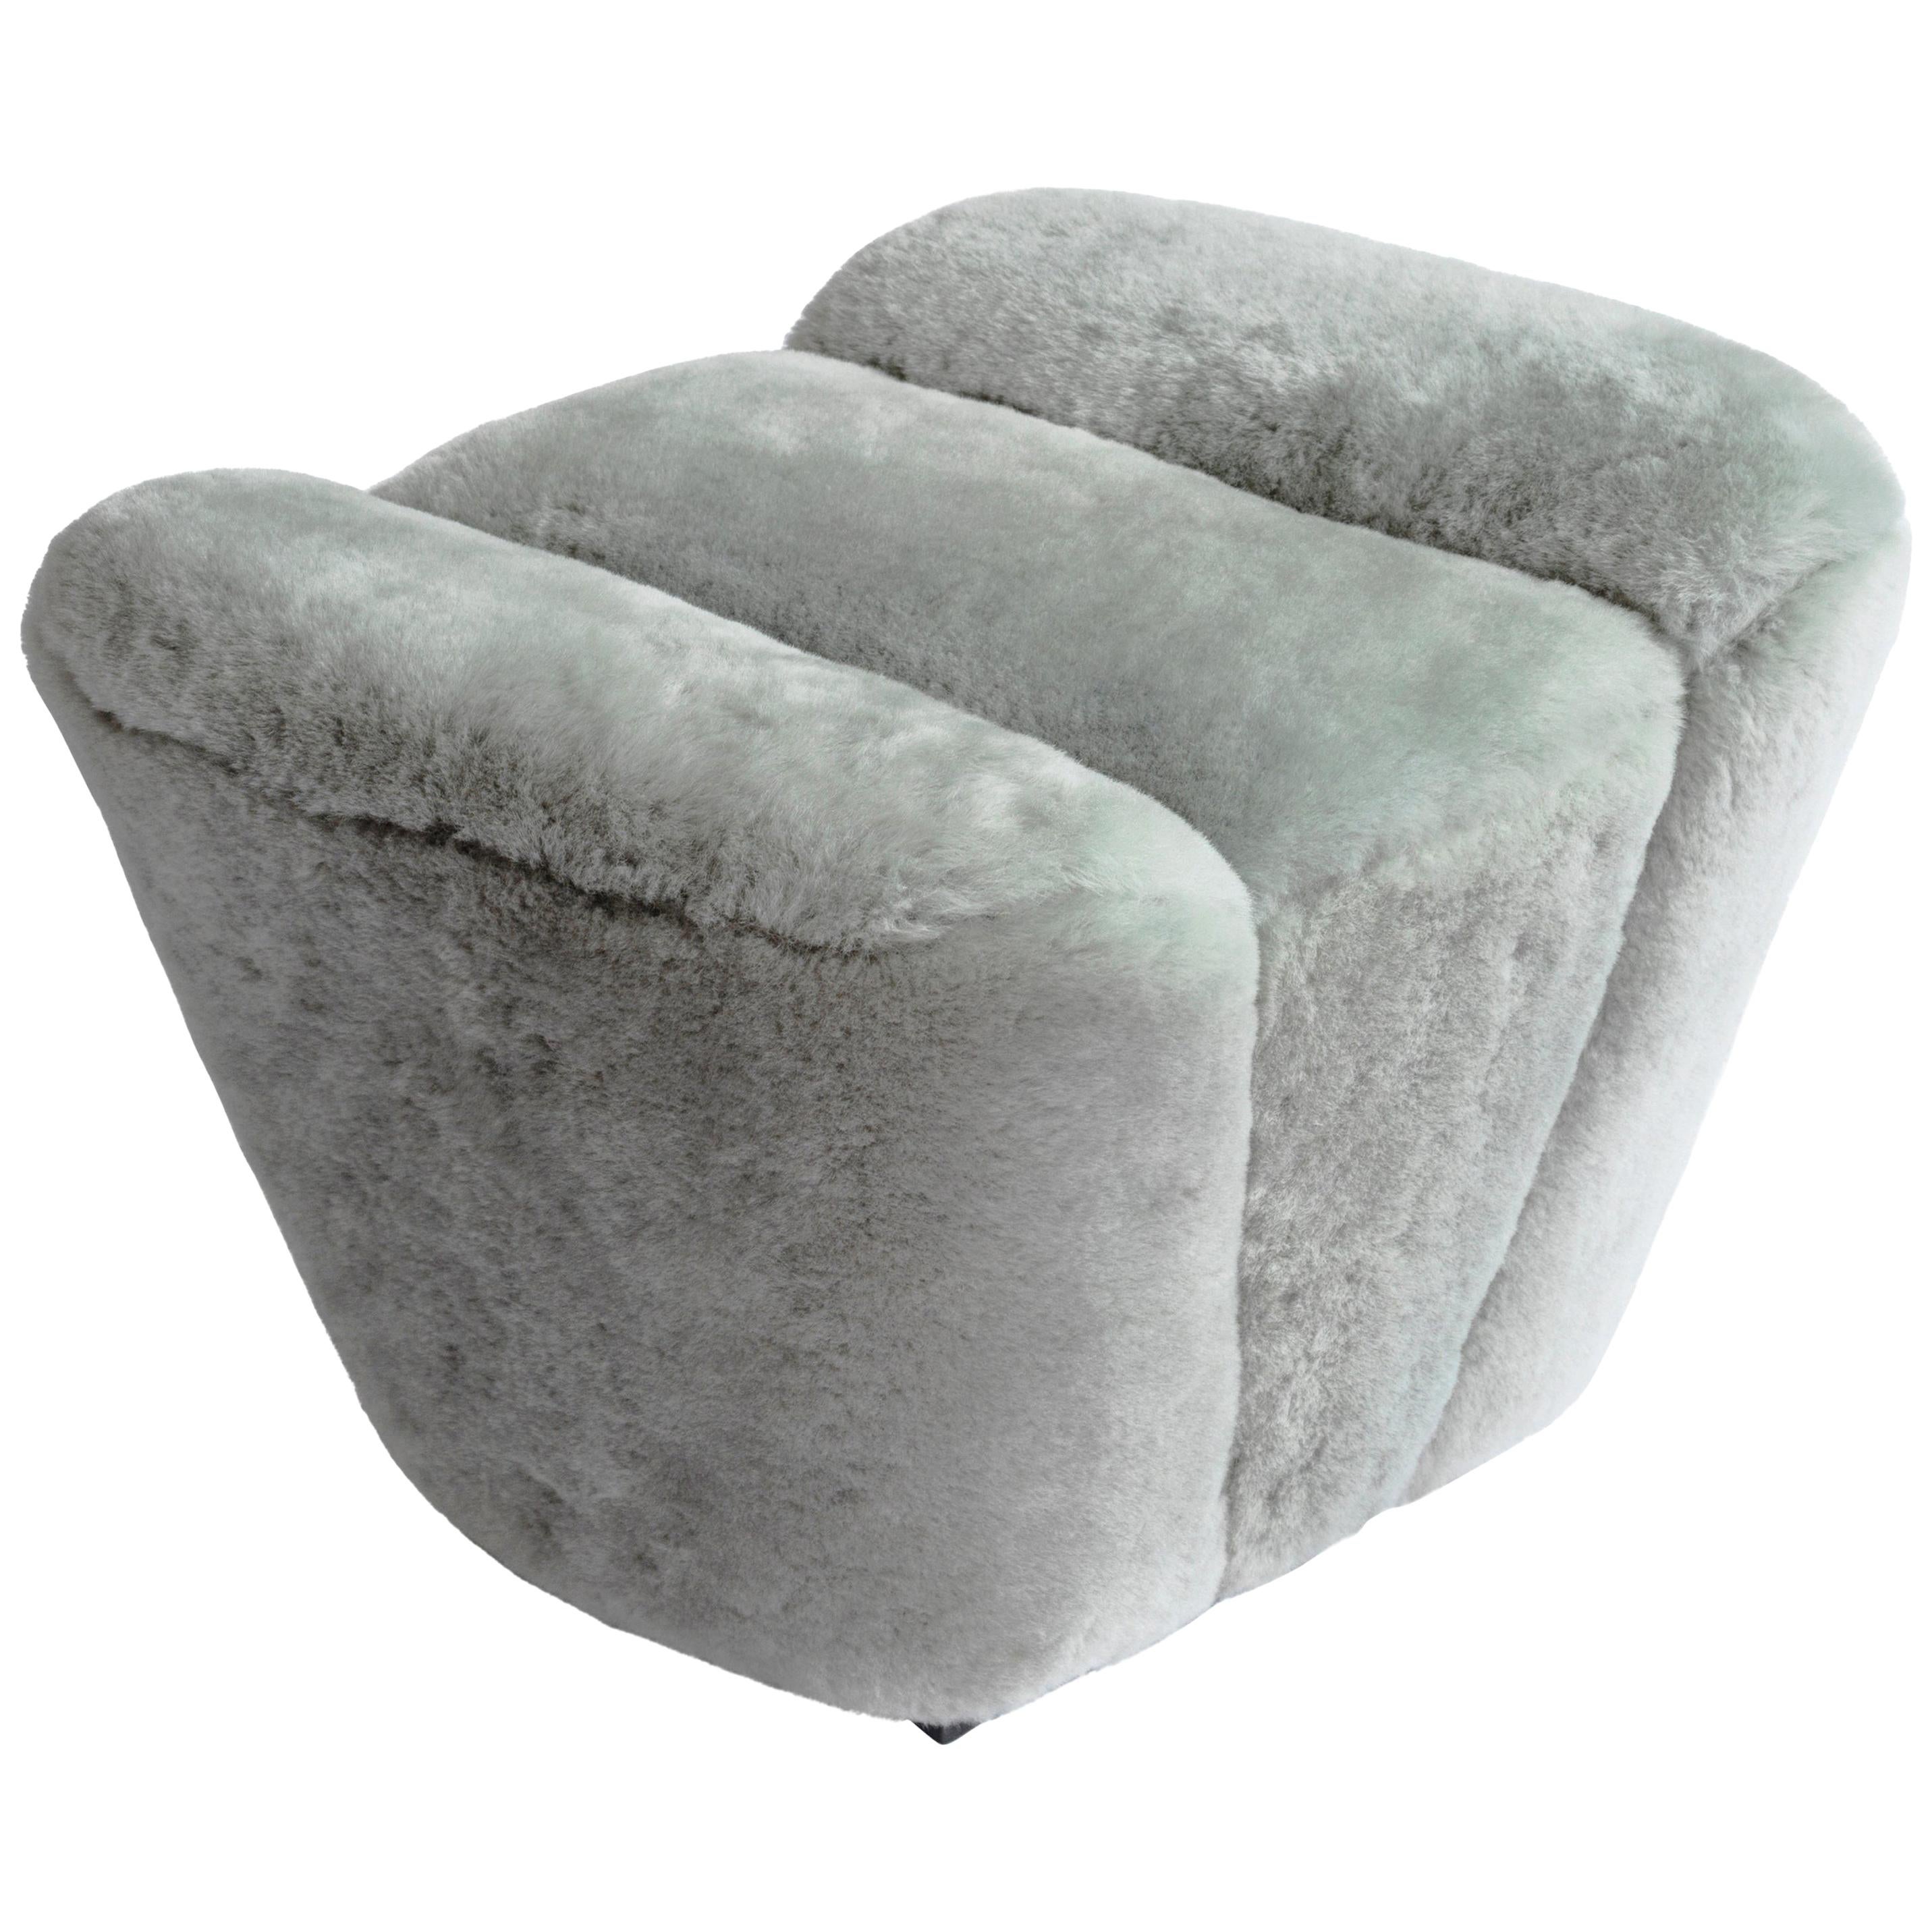 Contemporary Truffle Ottoman or Footstool in Grey Sheepskin Upholstery For Sale